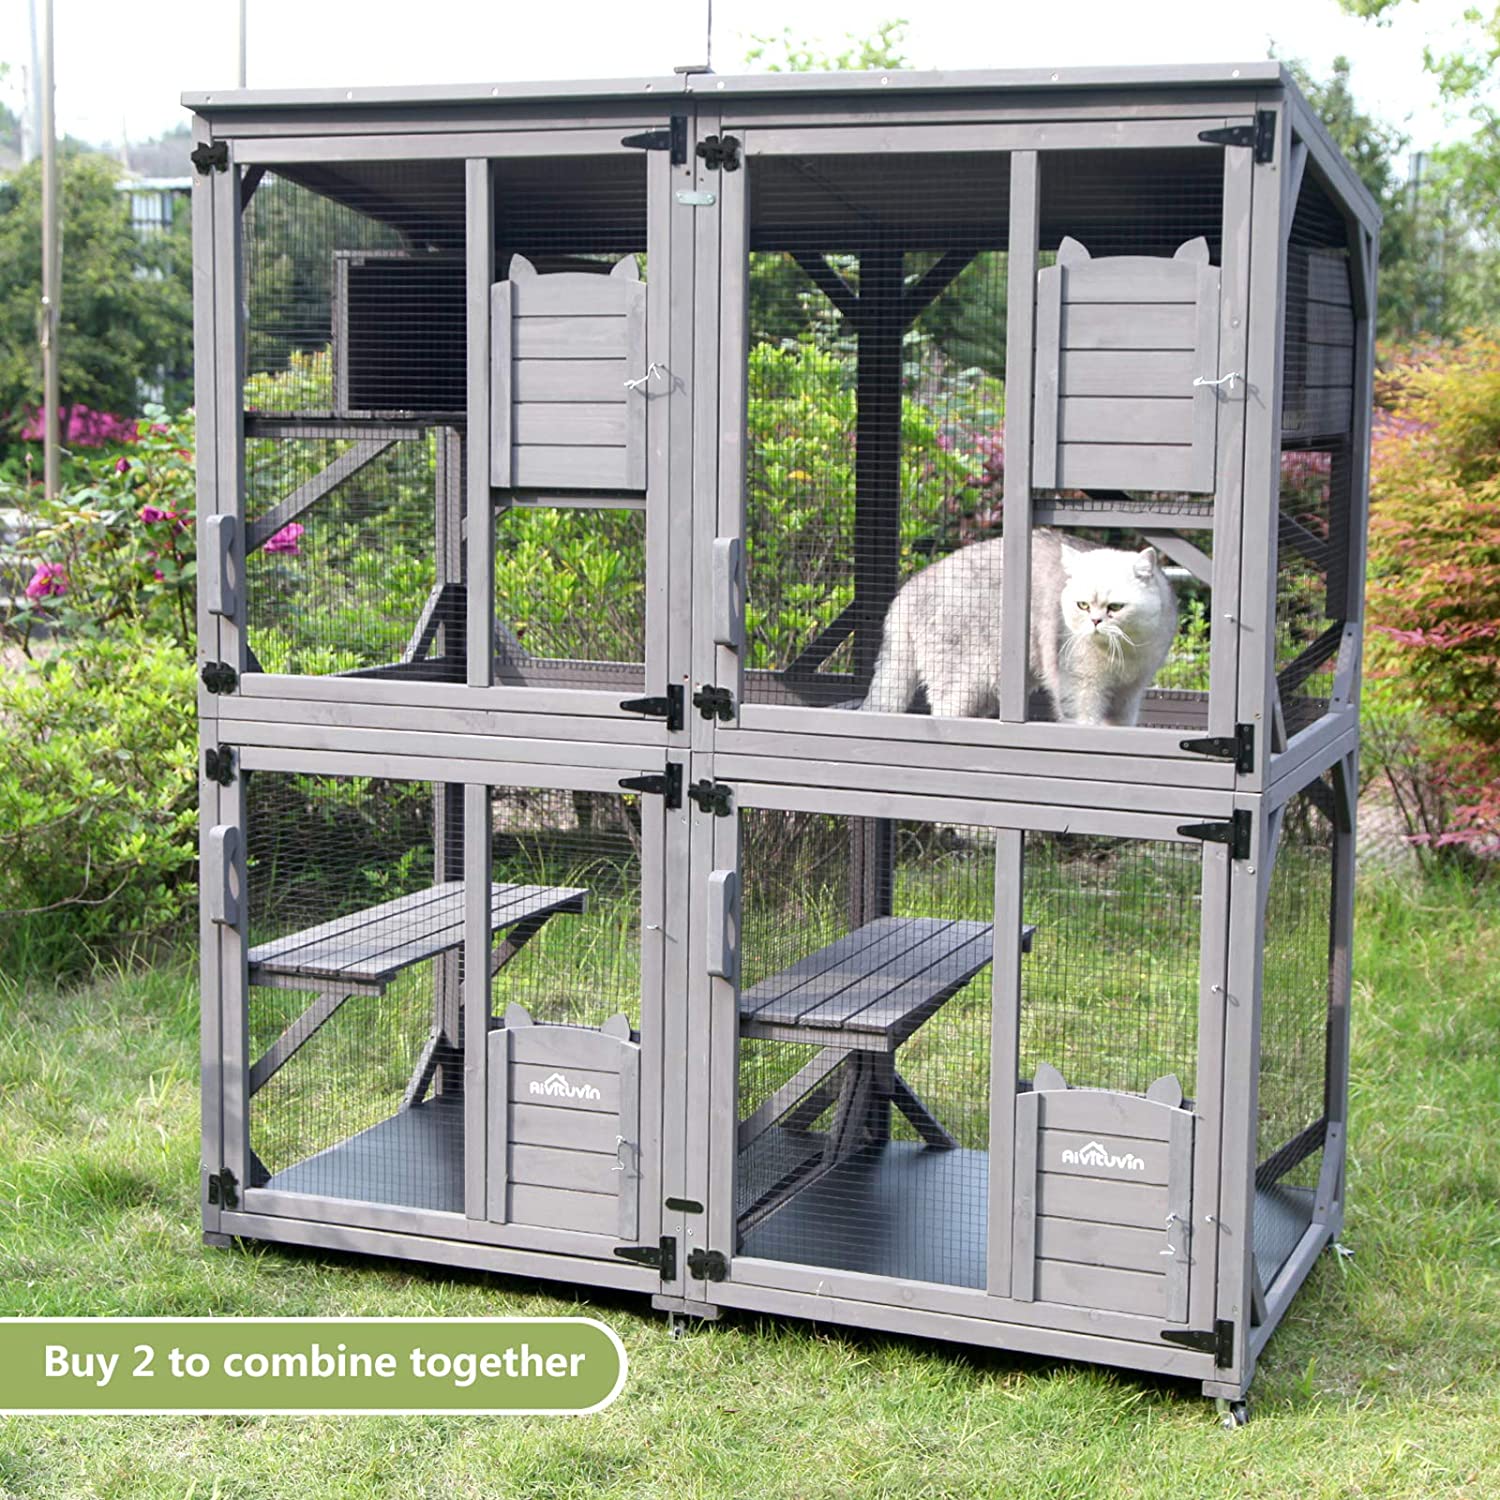 Aivituvin-AIR22 Cat House , Outdoor Cat Catio (Inner Space 13.2ft²)